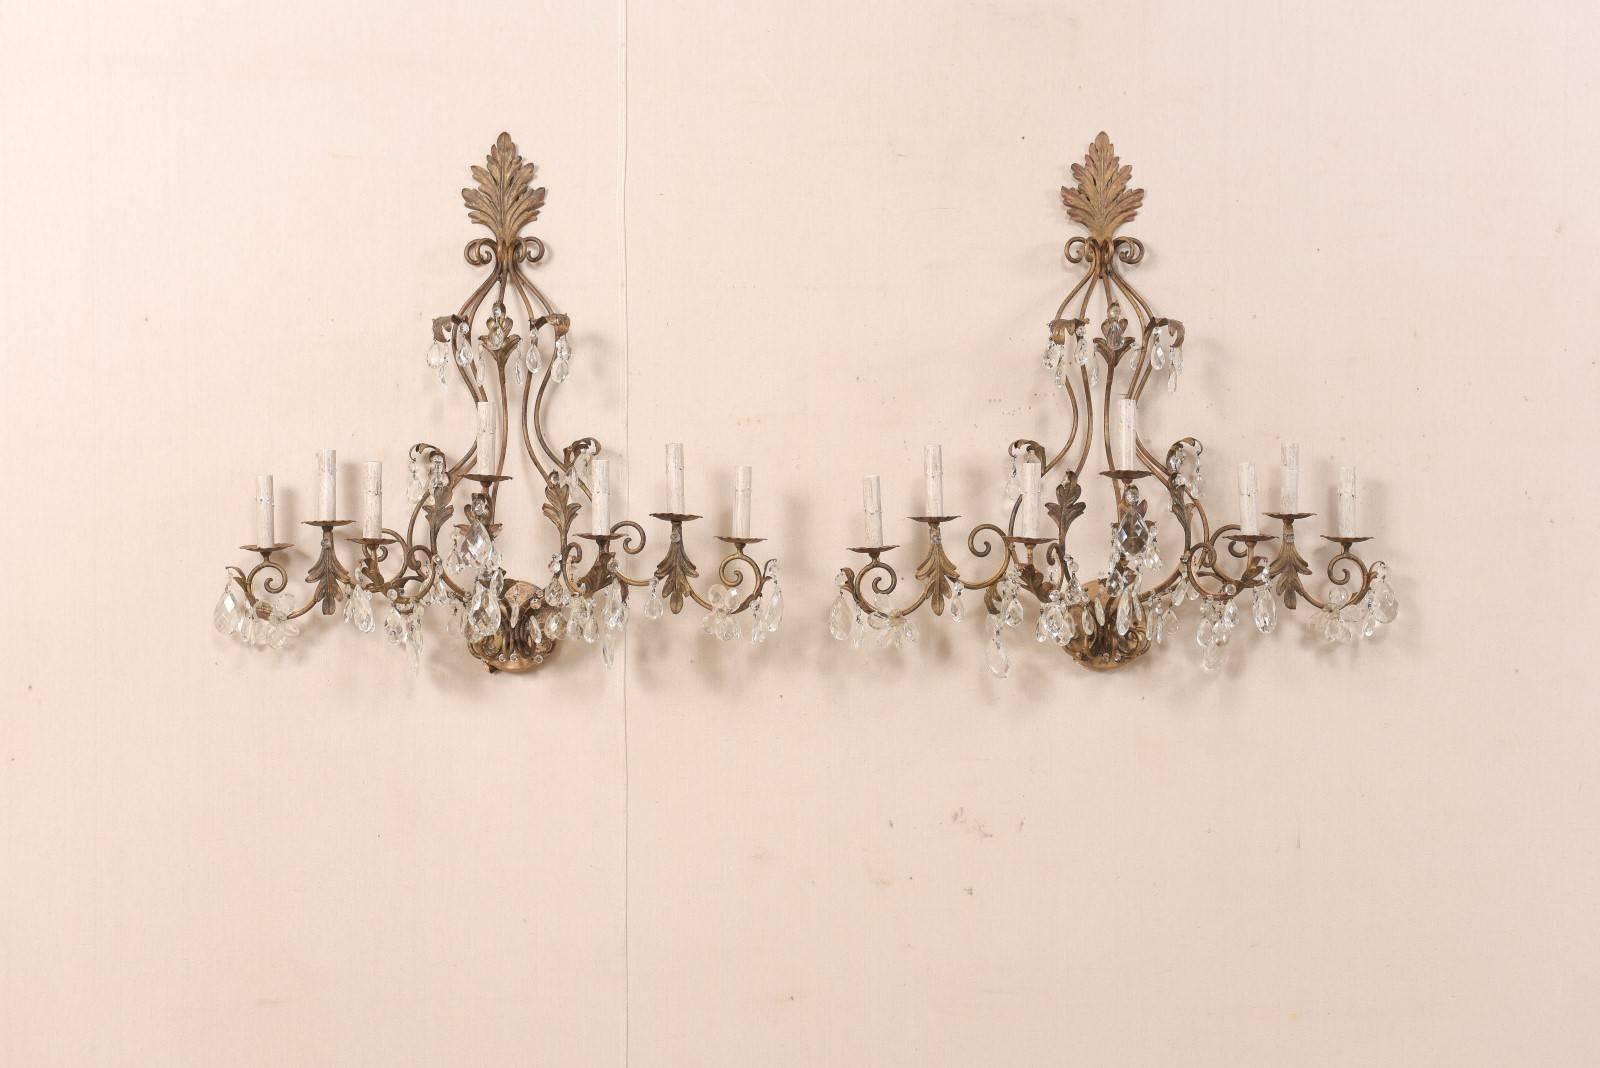 A pair of French crystal seven-light sconces from the mid-20th century. This pair of generously-sized, midcentury, French scones feature a warm bronze hue iron armature with scroll and leaf motif, which is adorn with various shapes of hanging